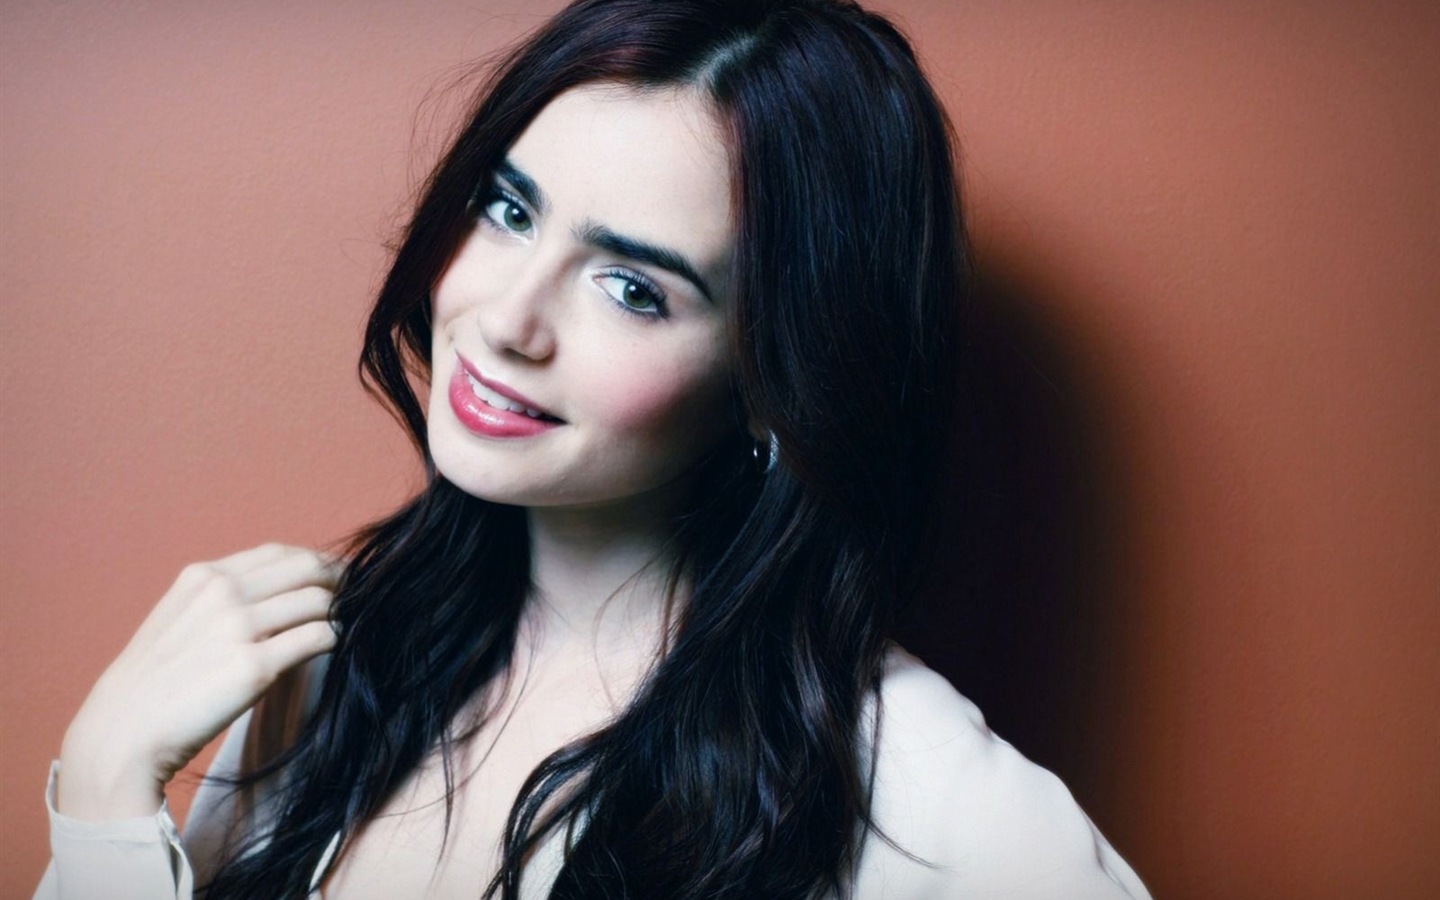 Lily Collins beautiful wallpapers #6 - 1440x900